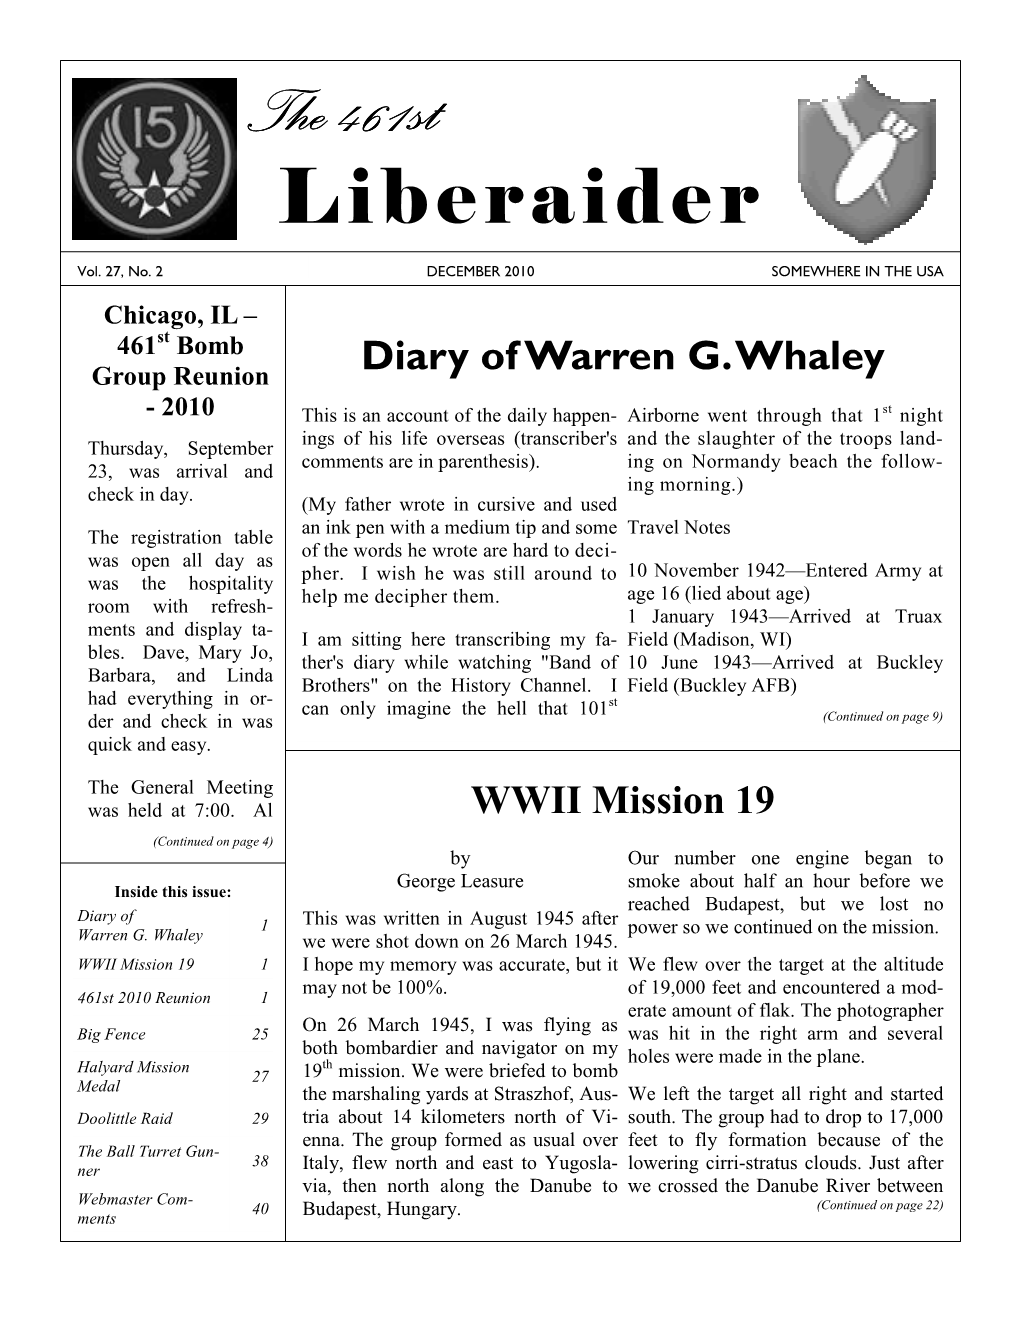 The 461St the 461St Liberaider